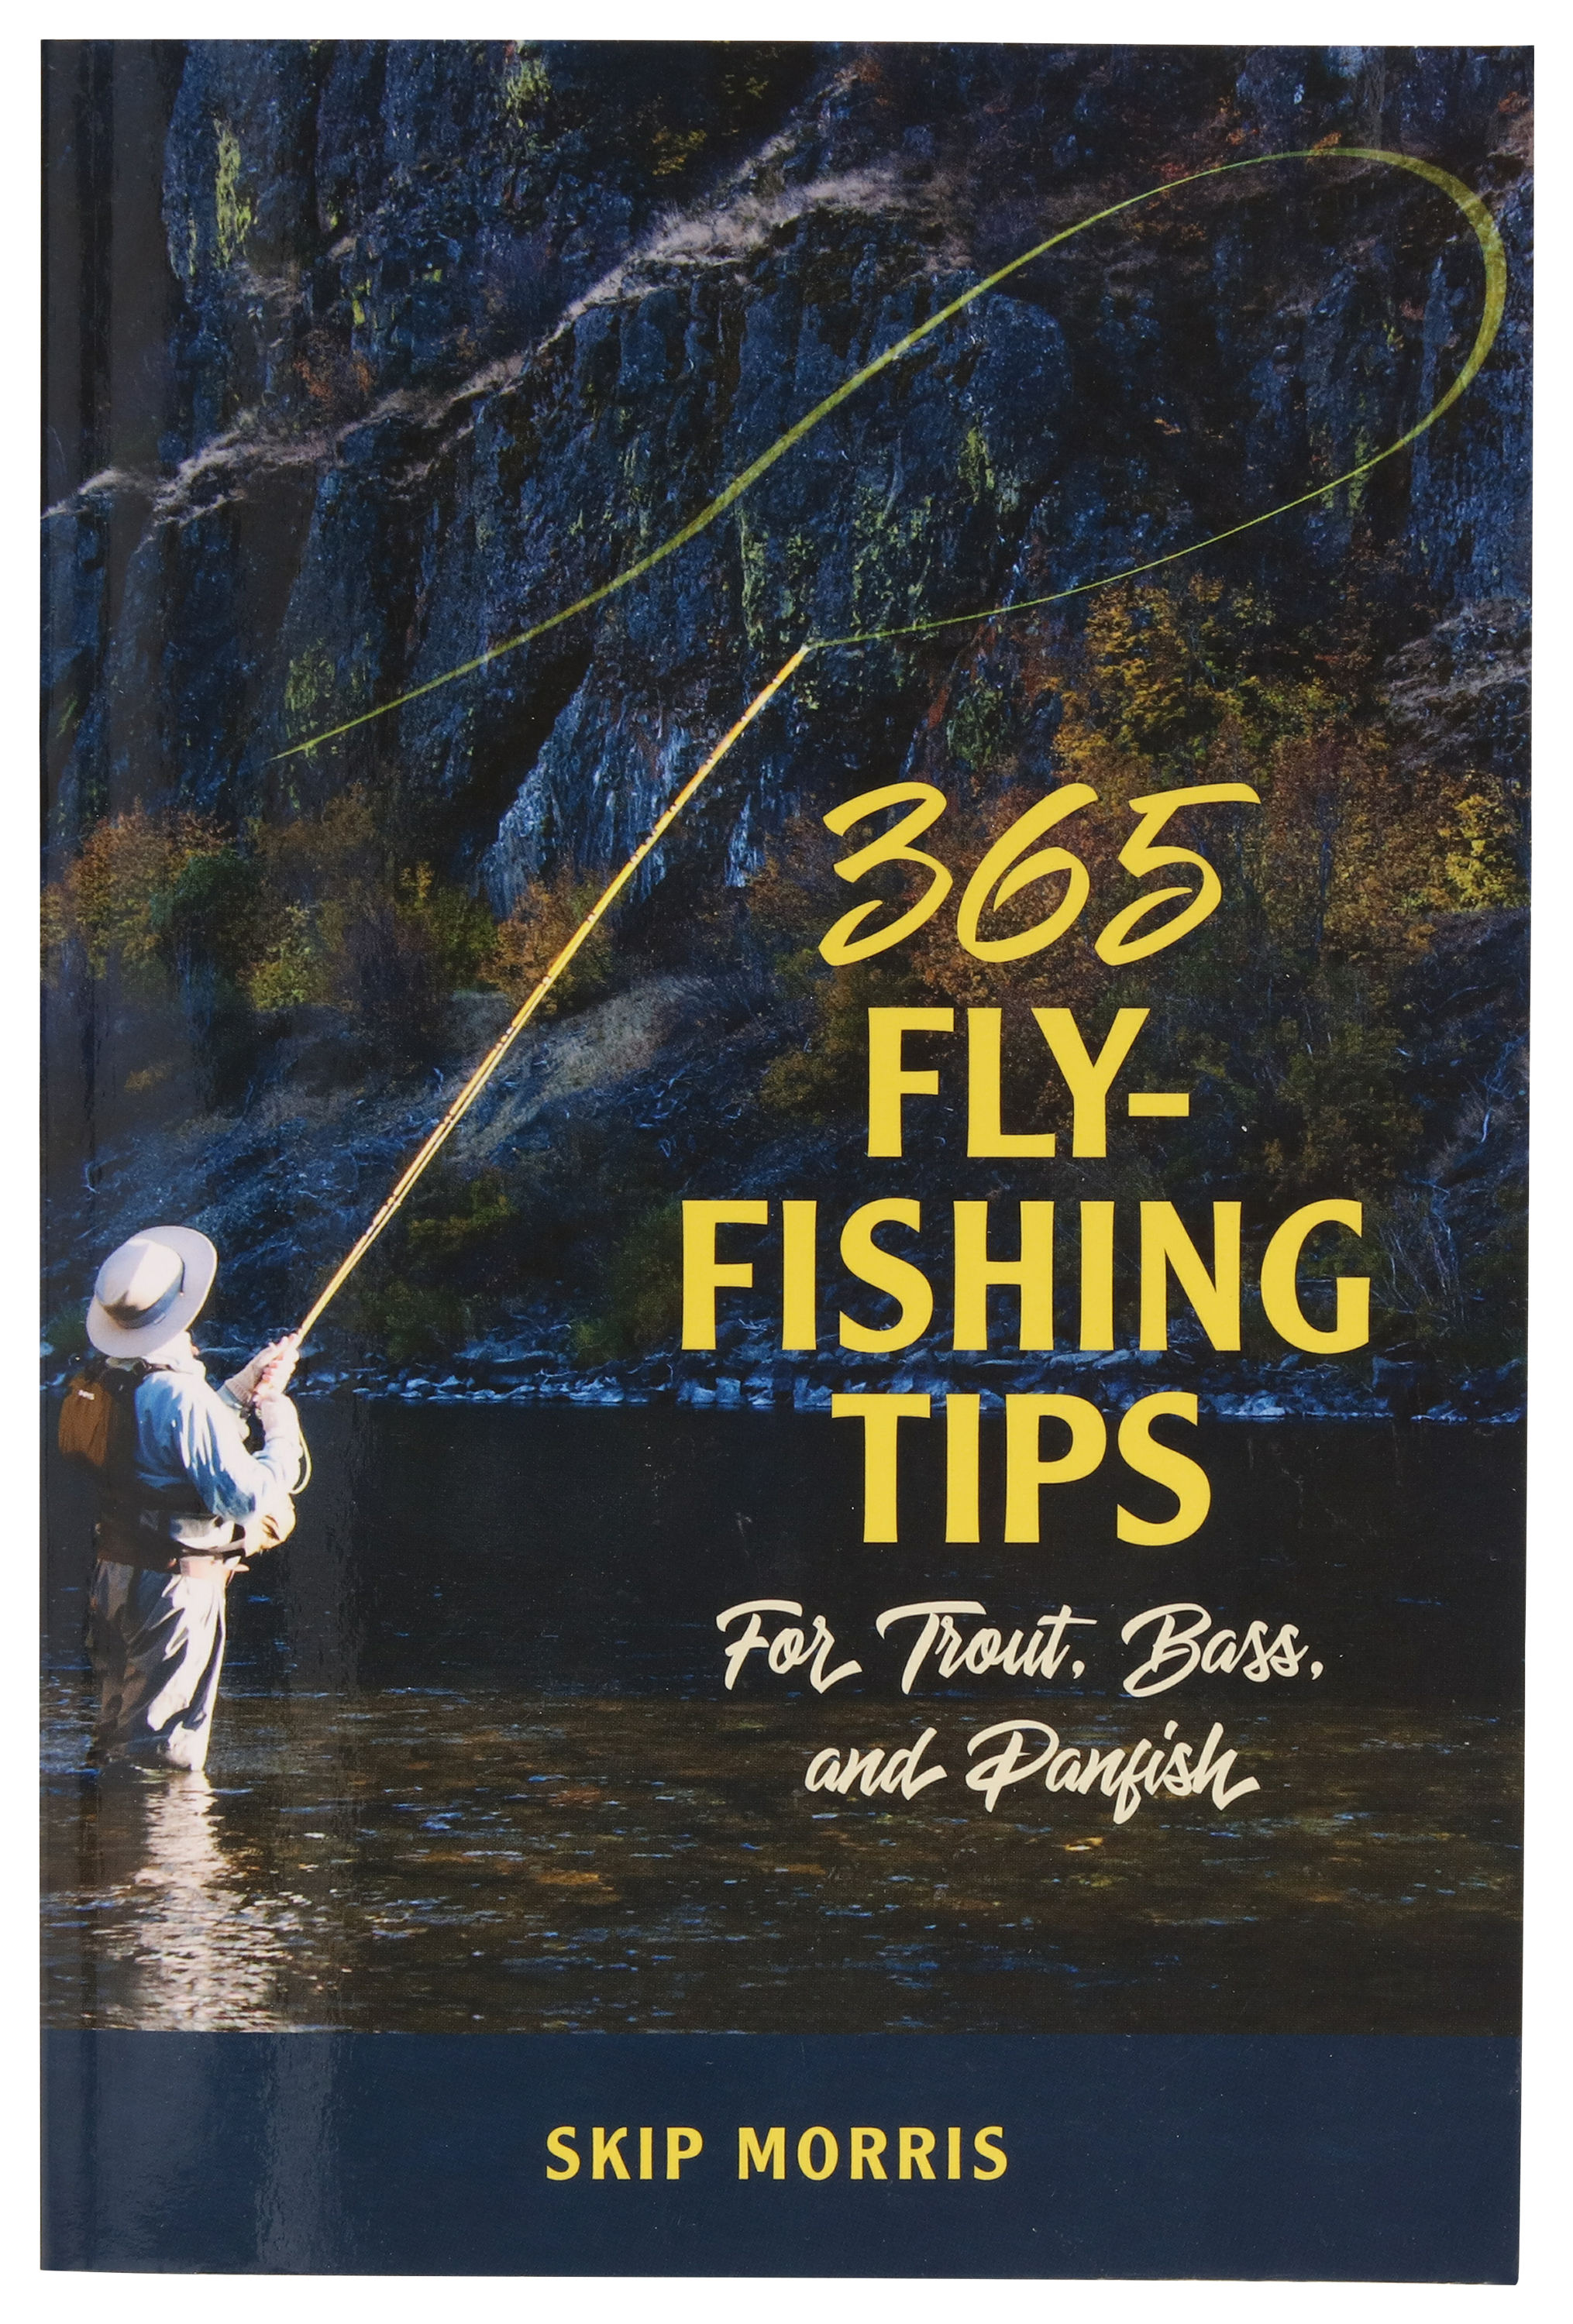 365 Fly-Fishing Tips for Trout, Bass, and Panfish Book by Skip Morris